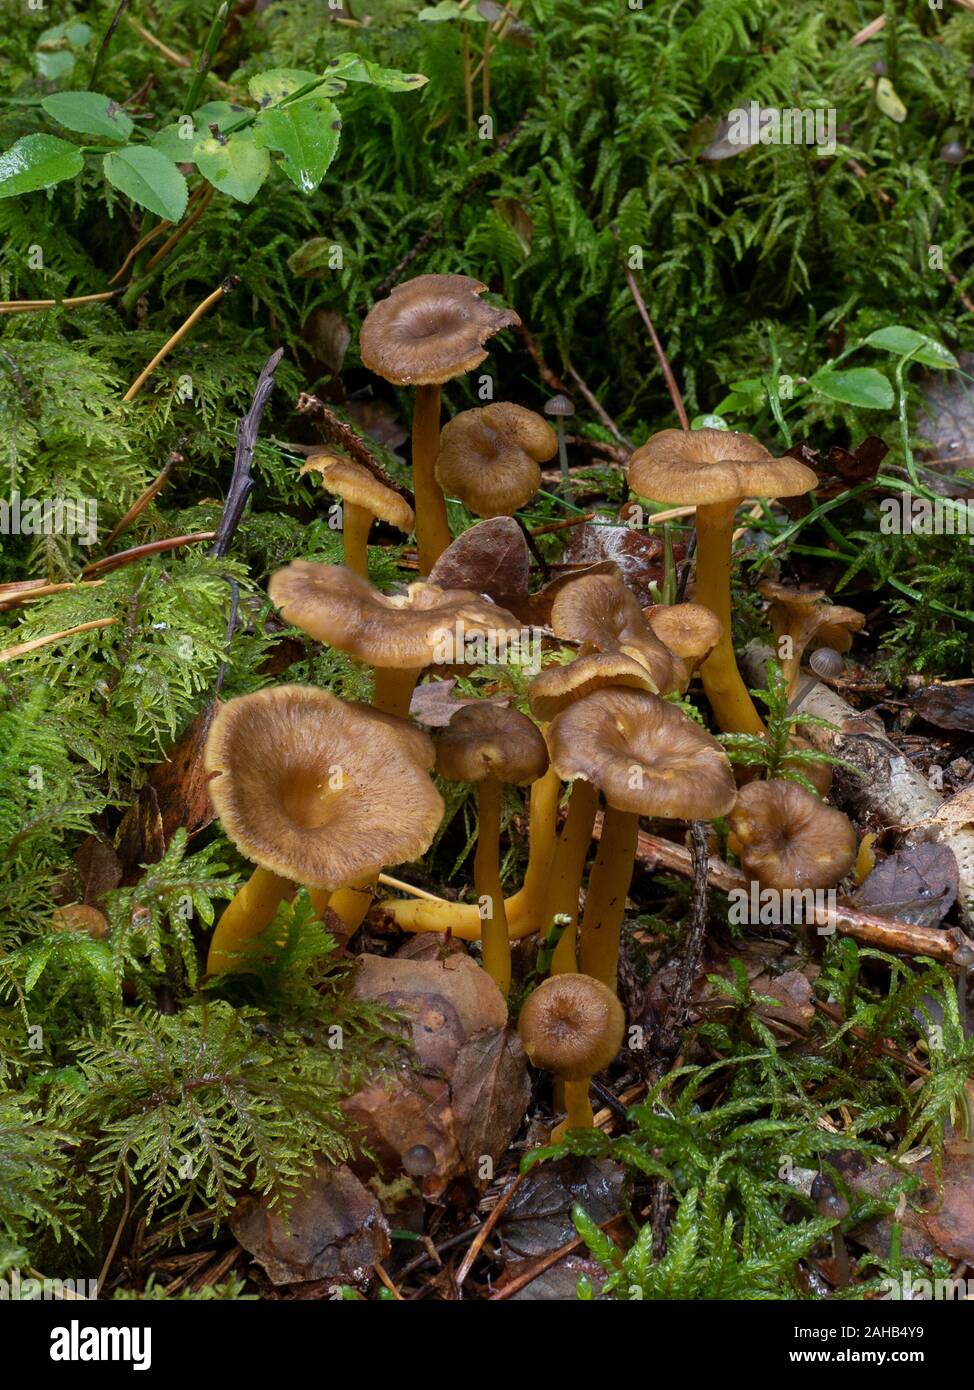 Craterellus tubaeformis (Cantharellus tubaeformis) is an edible fungus, also known as Yellowfoot, winter mushroom, or Funnel Chanterelle. Stock Photo